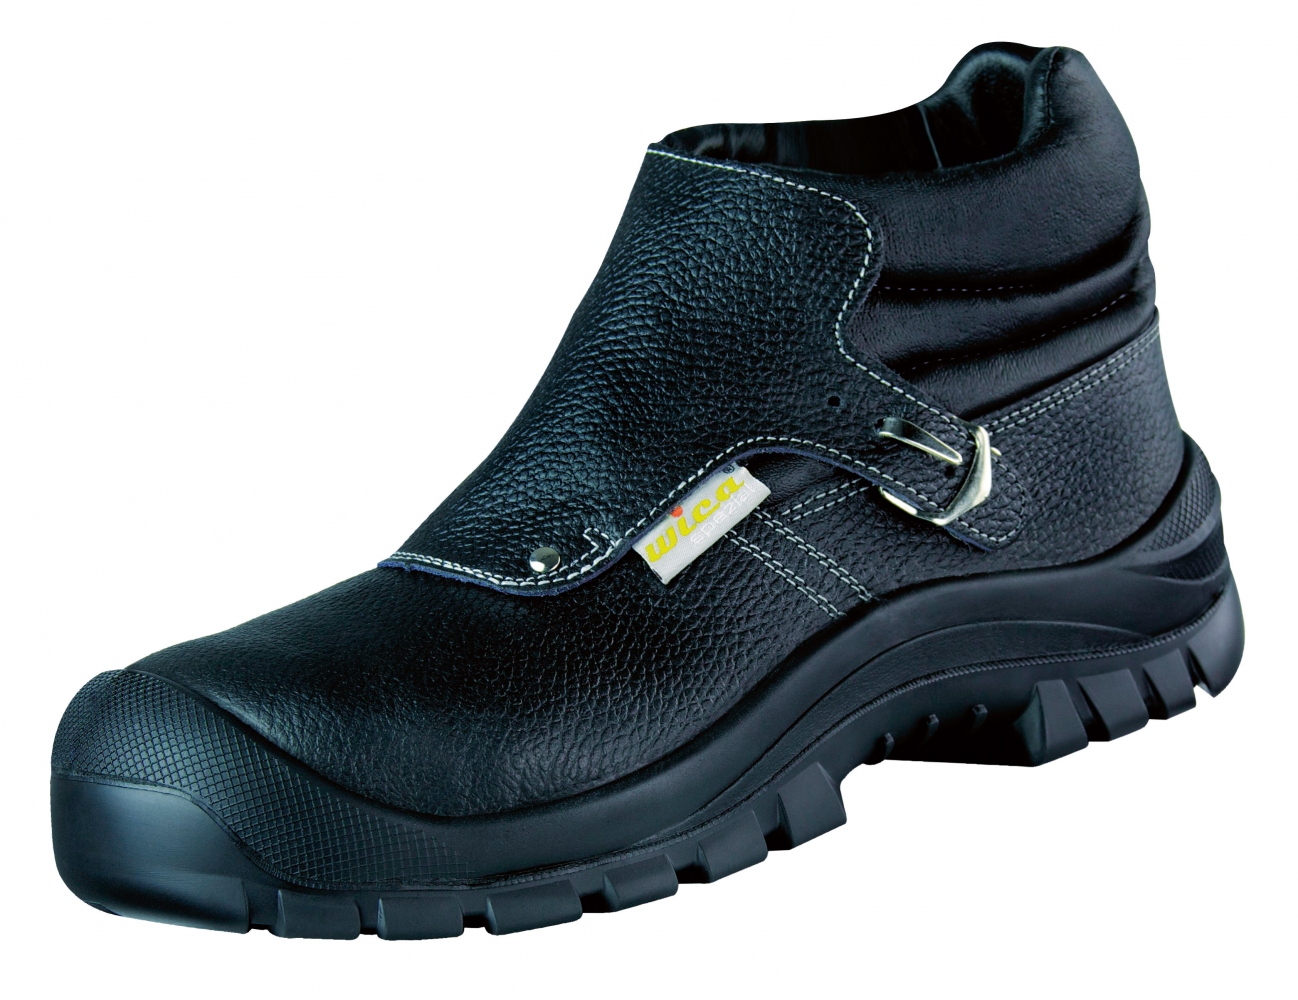 safety boots for welders